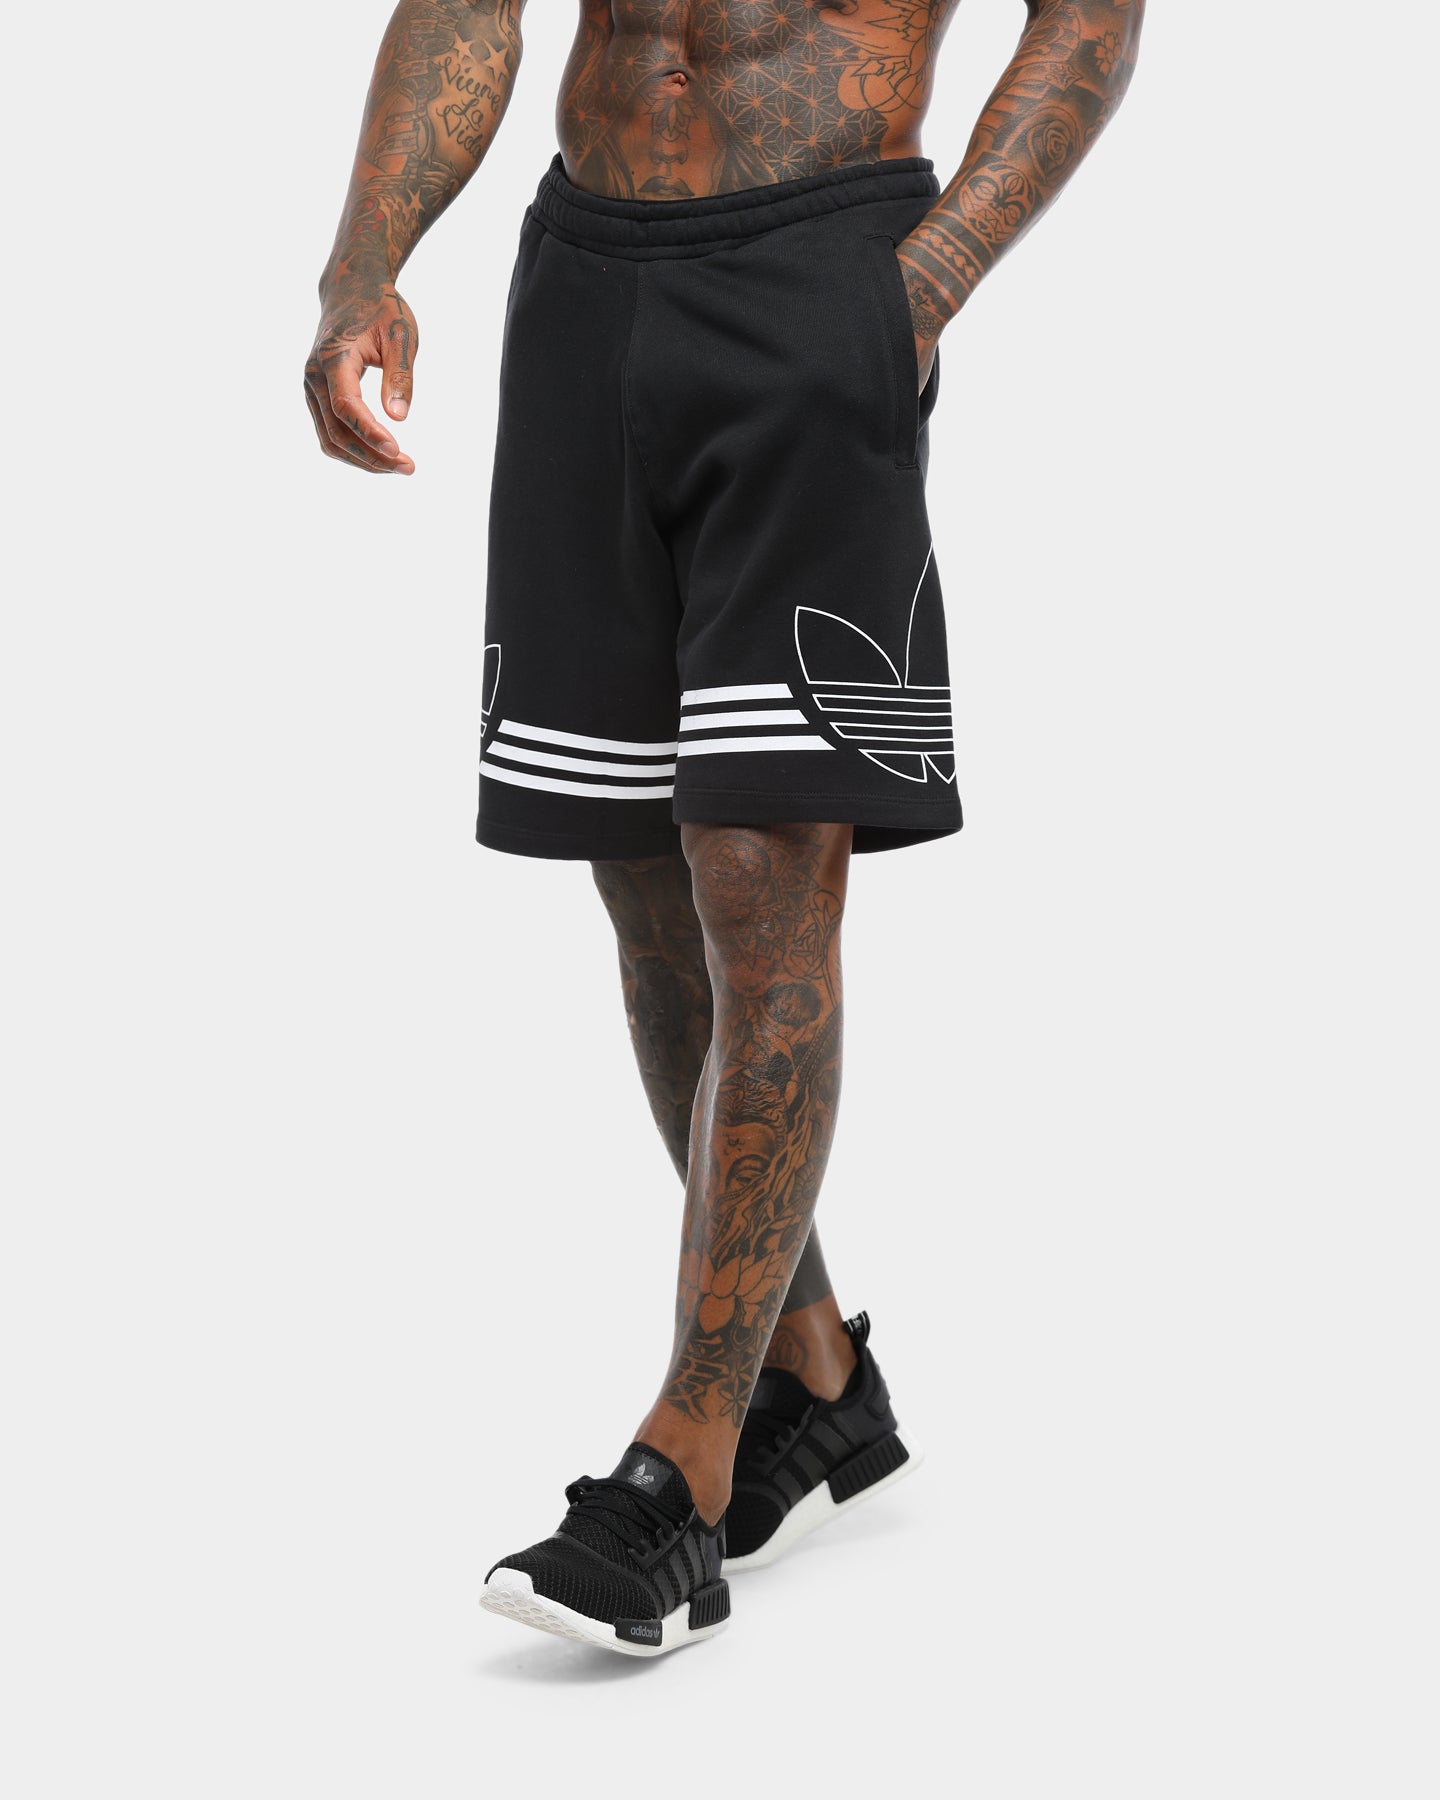 outline shorts adidas